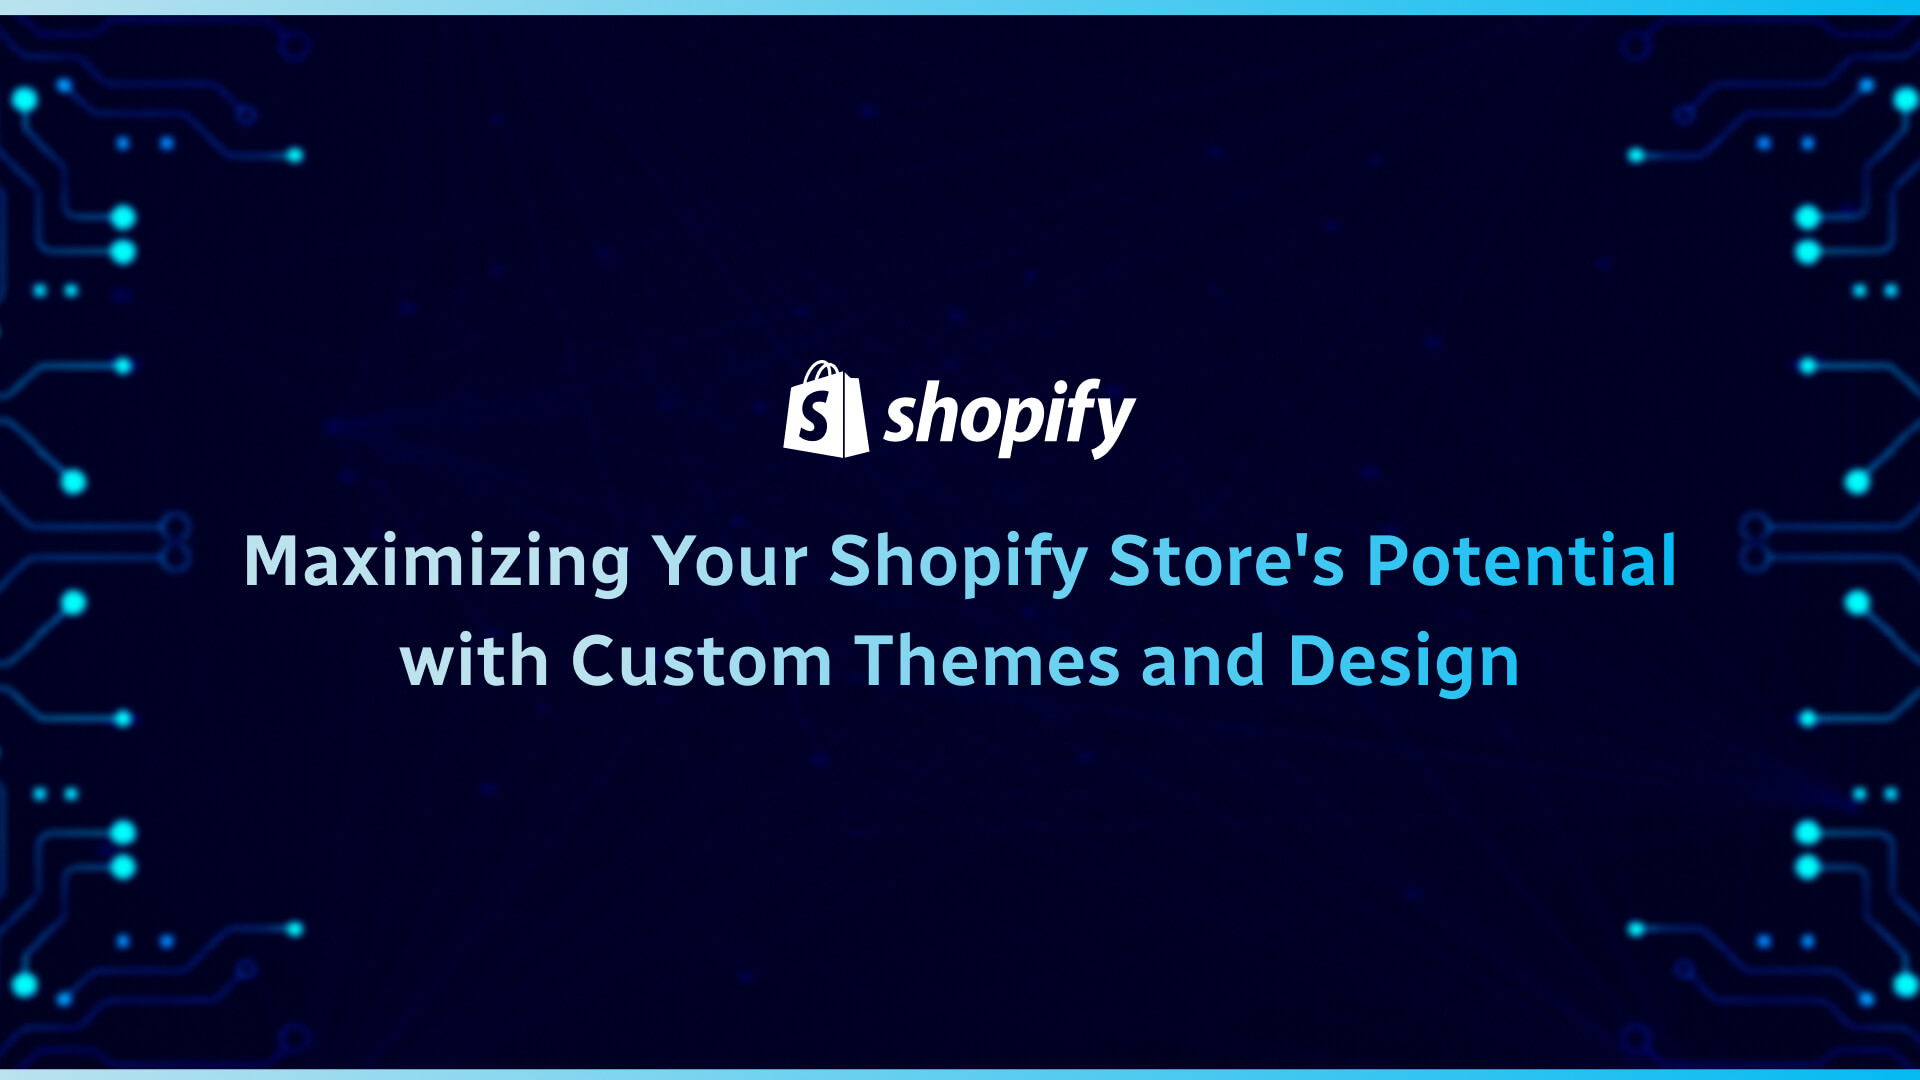 Maximizing Your Shopify Store’s Potential with Custom Themes and Design